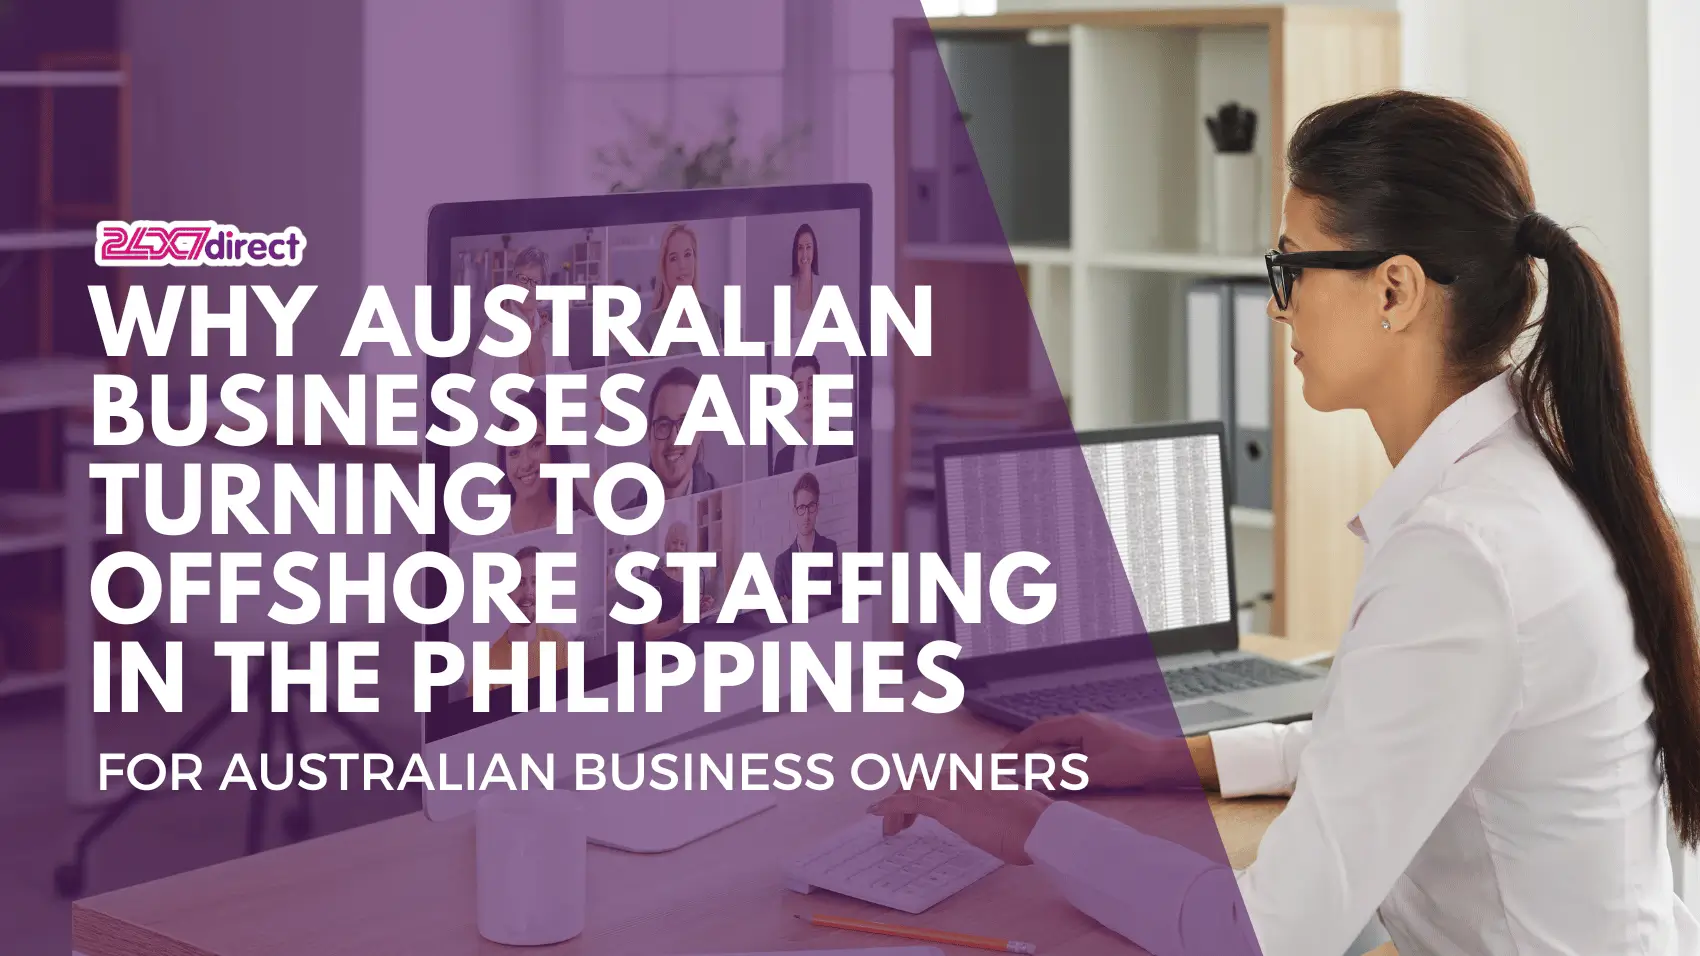 Why Australian Businesses Are Turning to Offshore Staffing in the Philippines